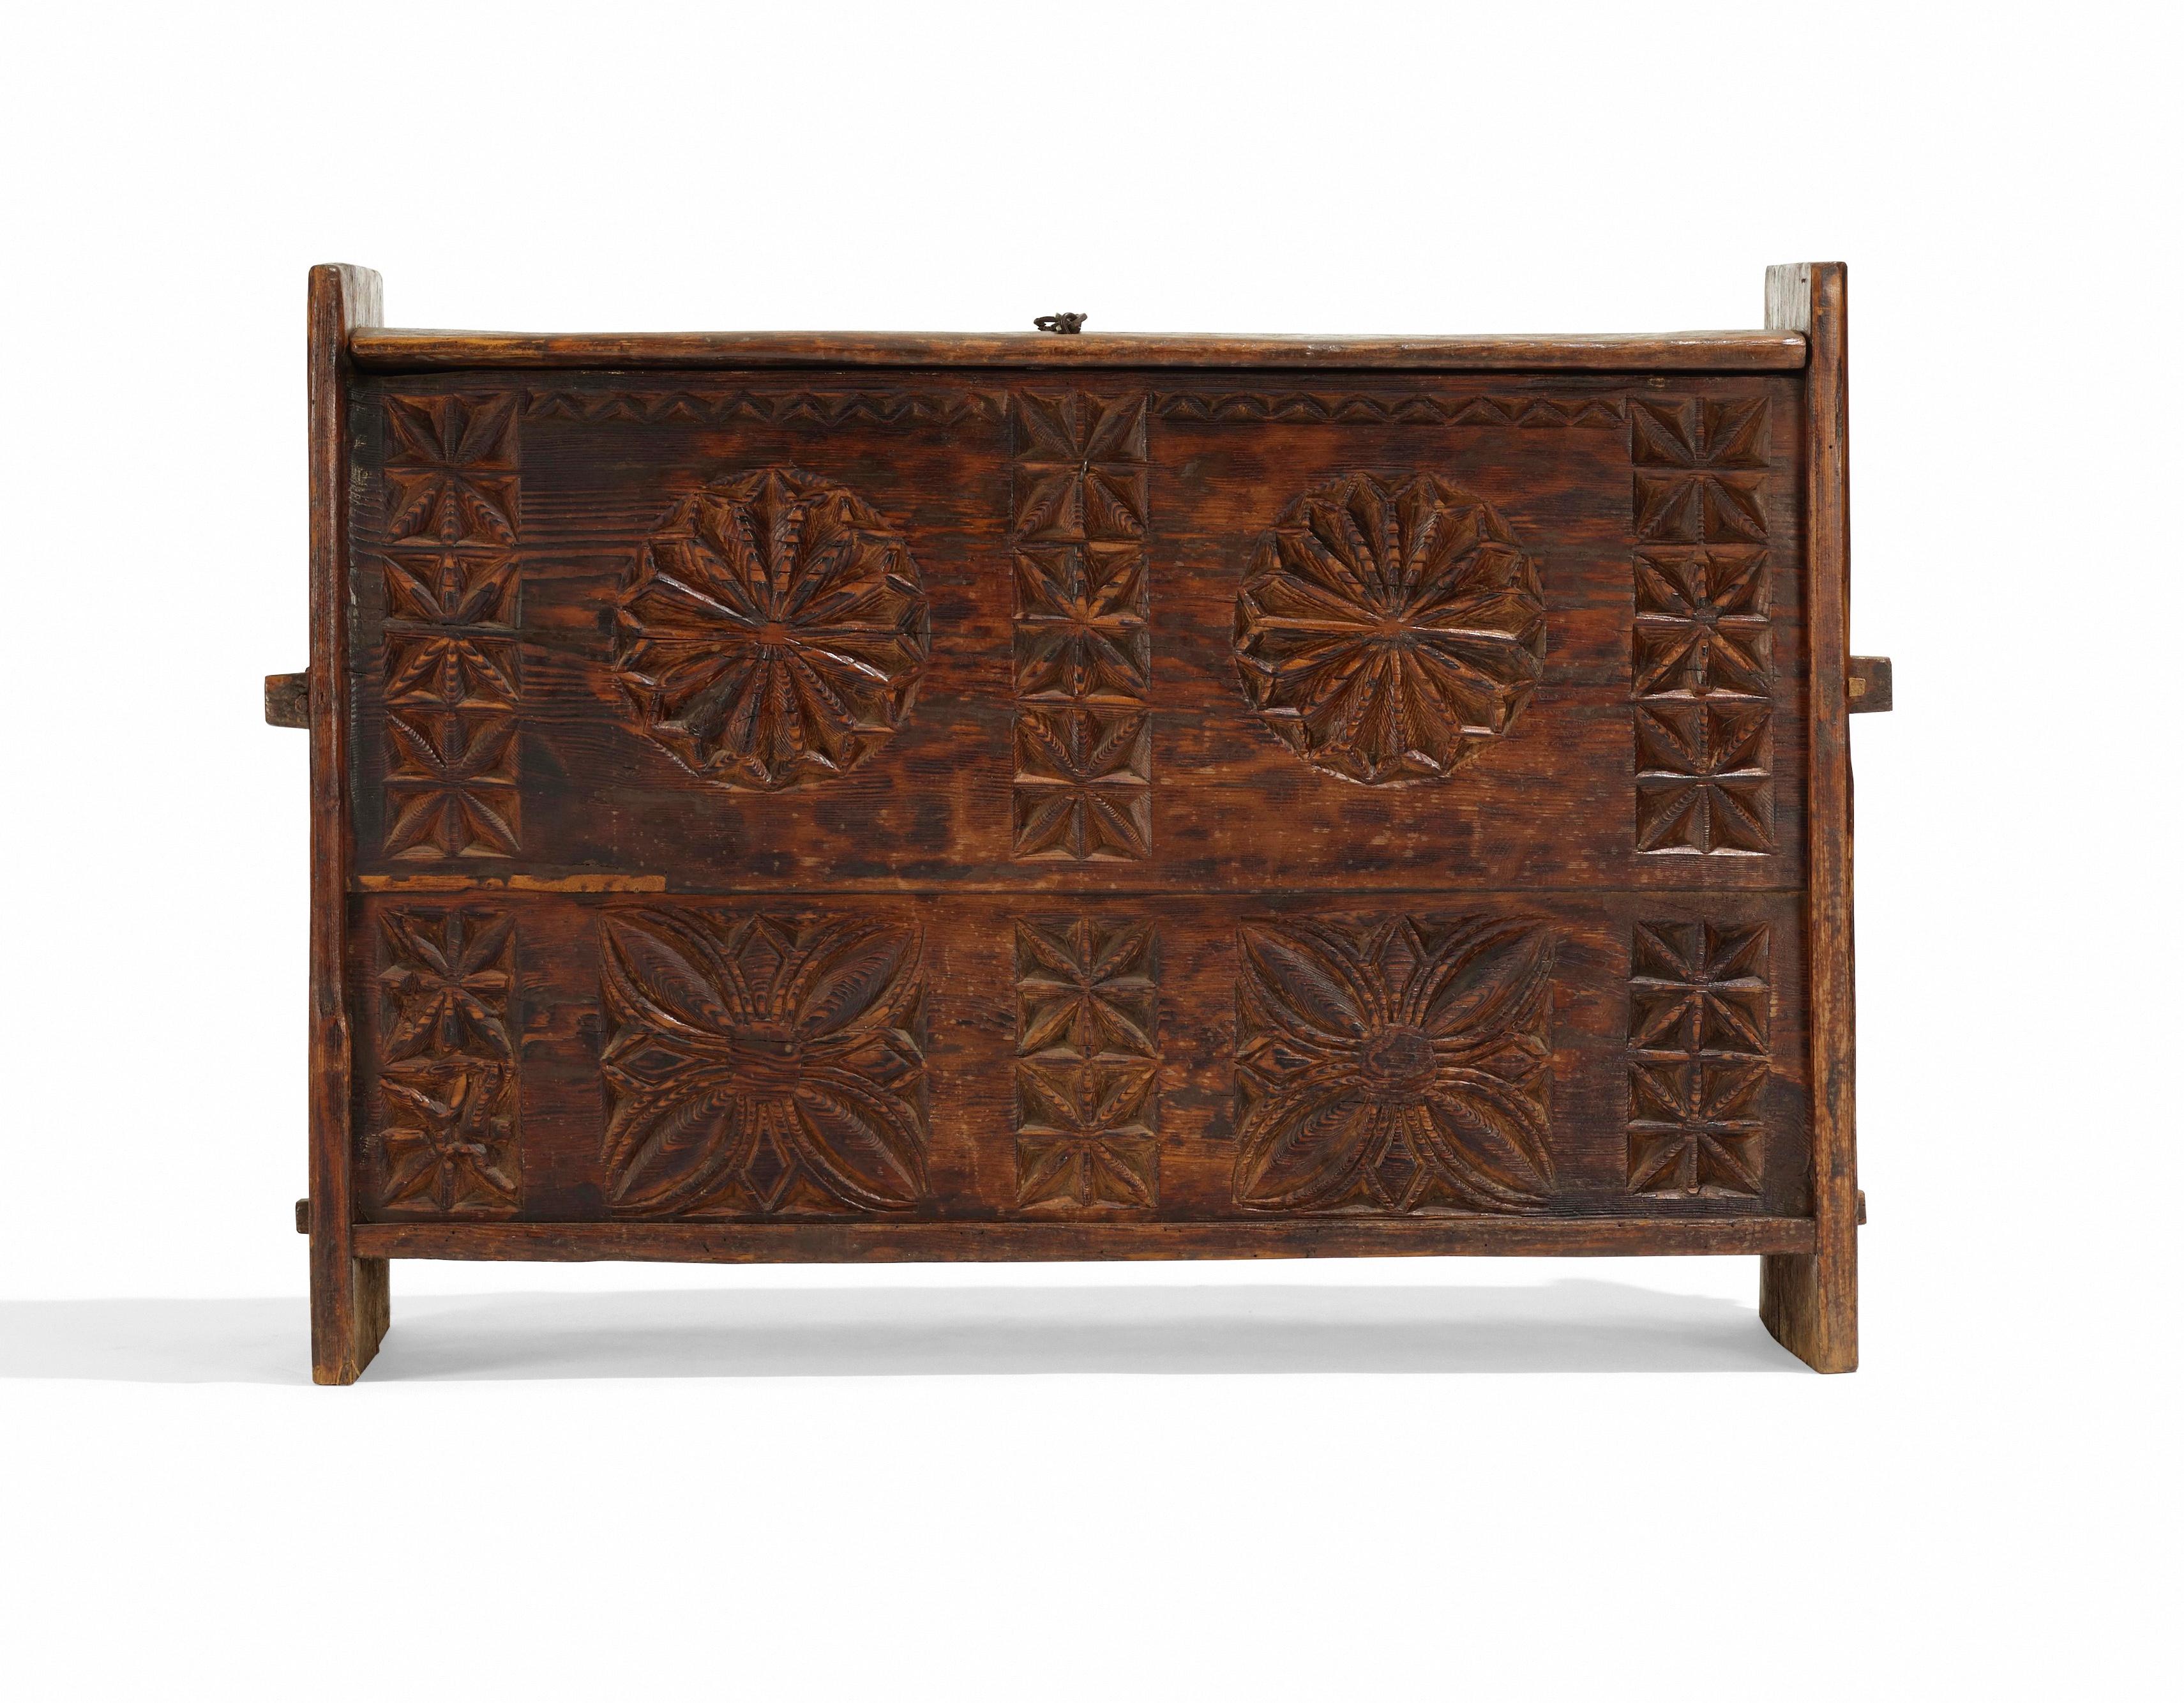 A striking antique chest from the Nuristan province of northeast Afghanistan, dating to the late 19th-early 20th century. Split wood with wedged mortise and tenon construction, a wood-hinged lid fitted with hand forged iron hardware, and its front